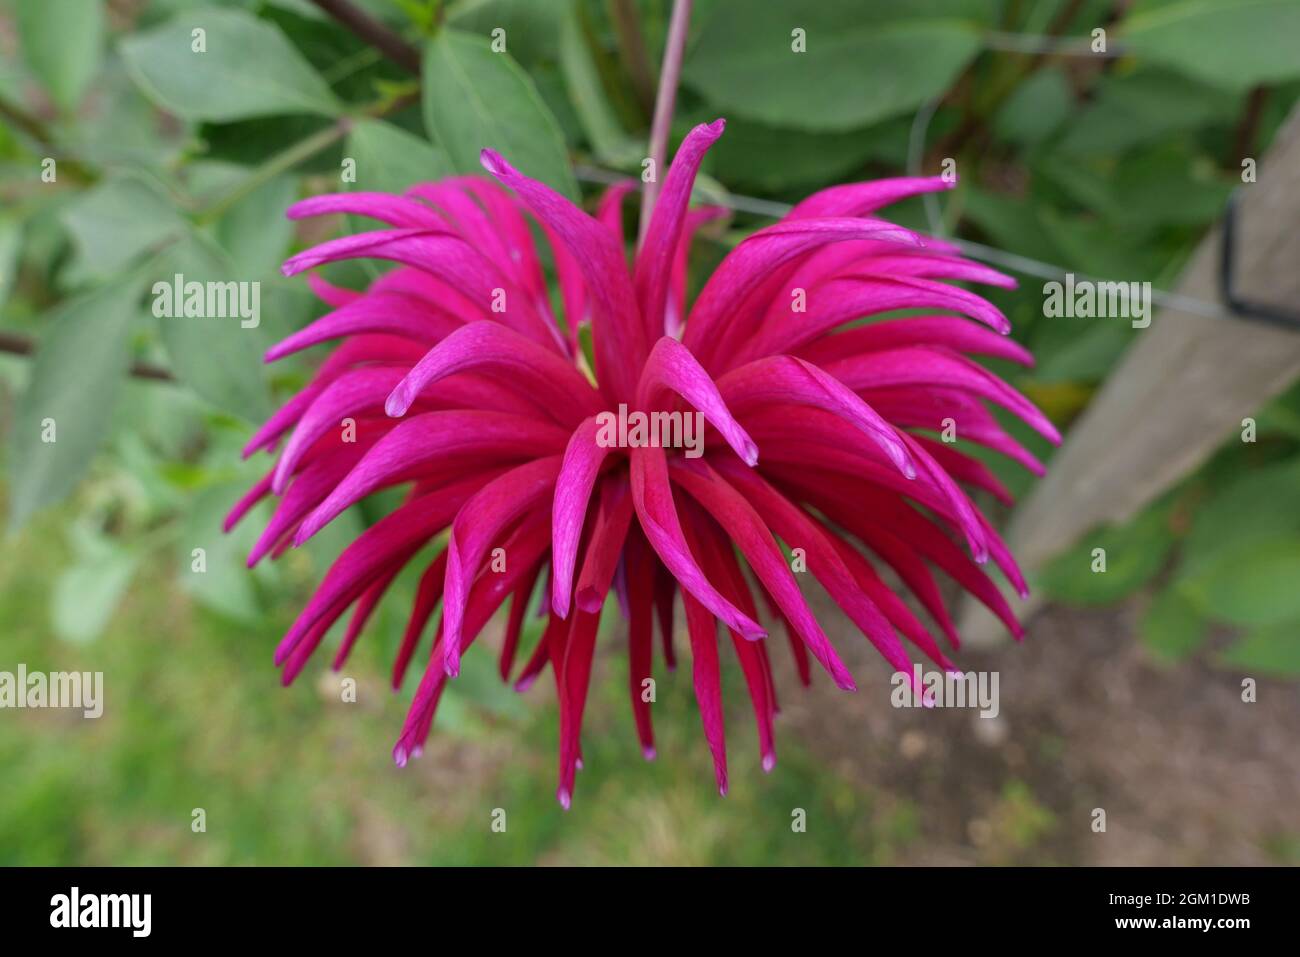 Vivid pink shaggy dahlia with pointed petals and green foliage Stock Photo